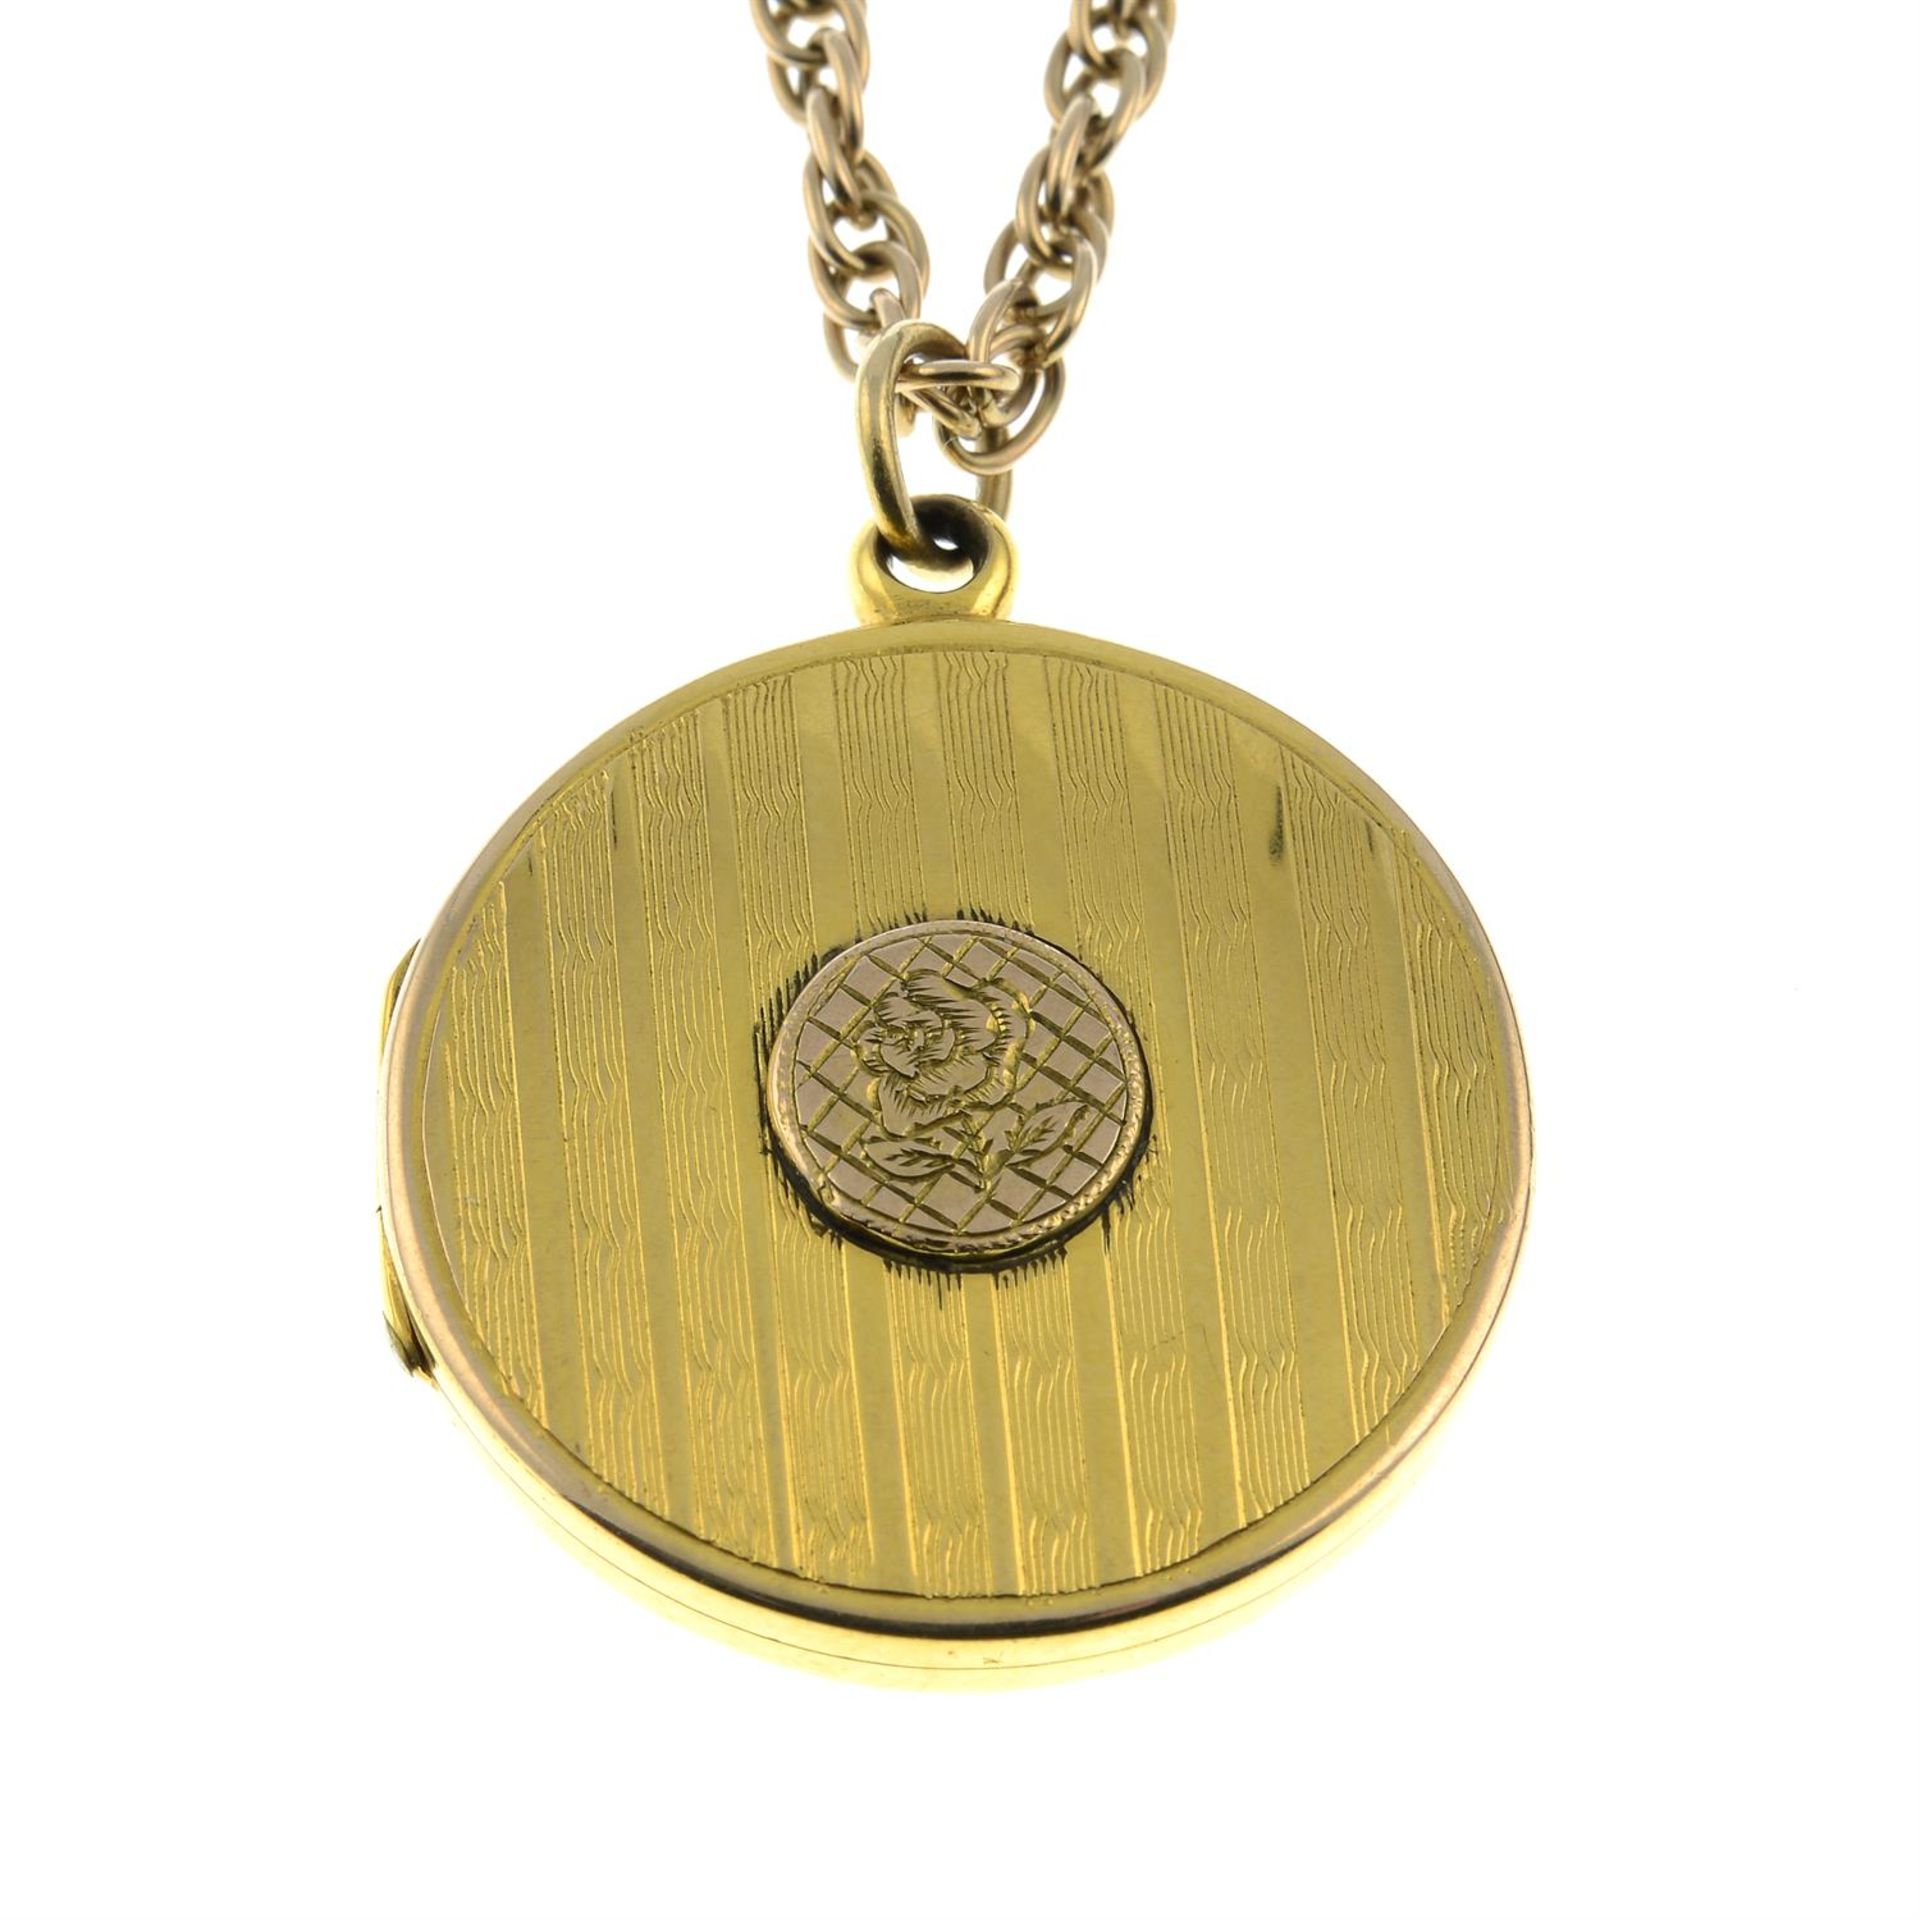 An early 20th century 9ct gold floral and striped engraved locket, with 9ct gold chain.